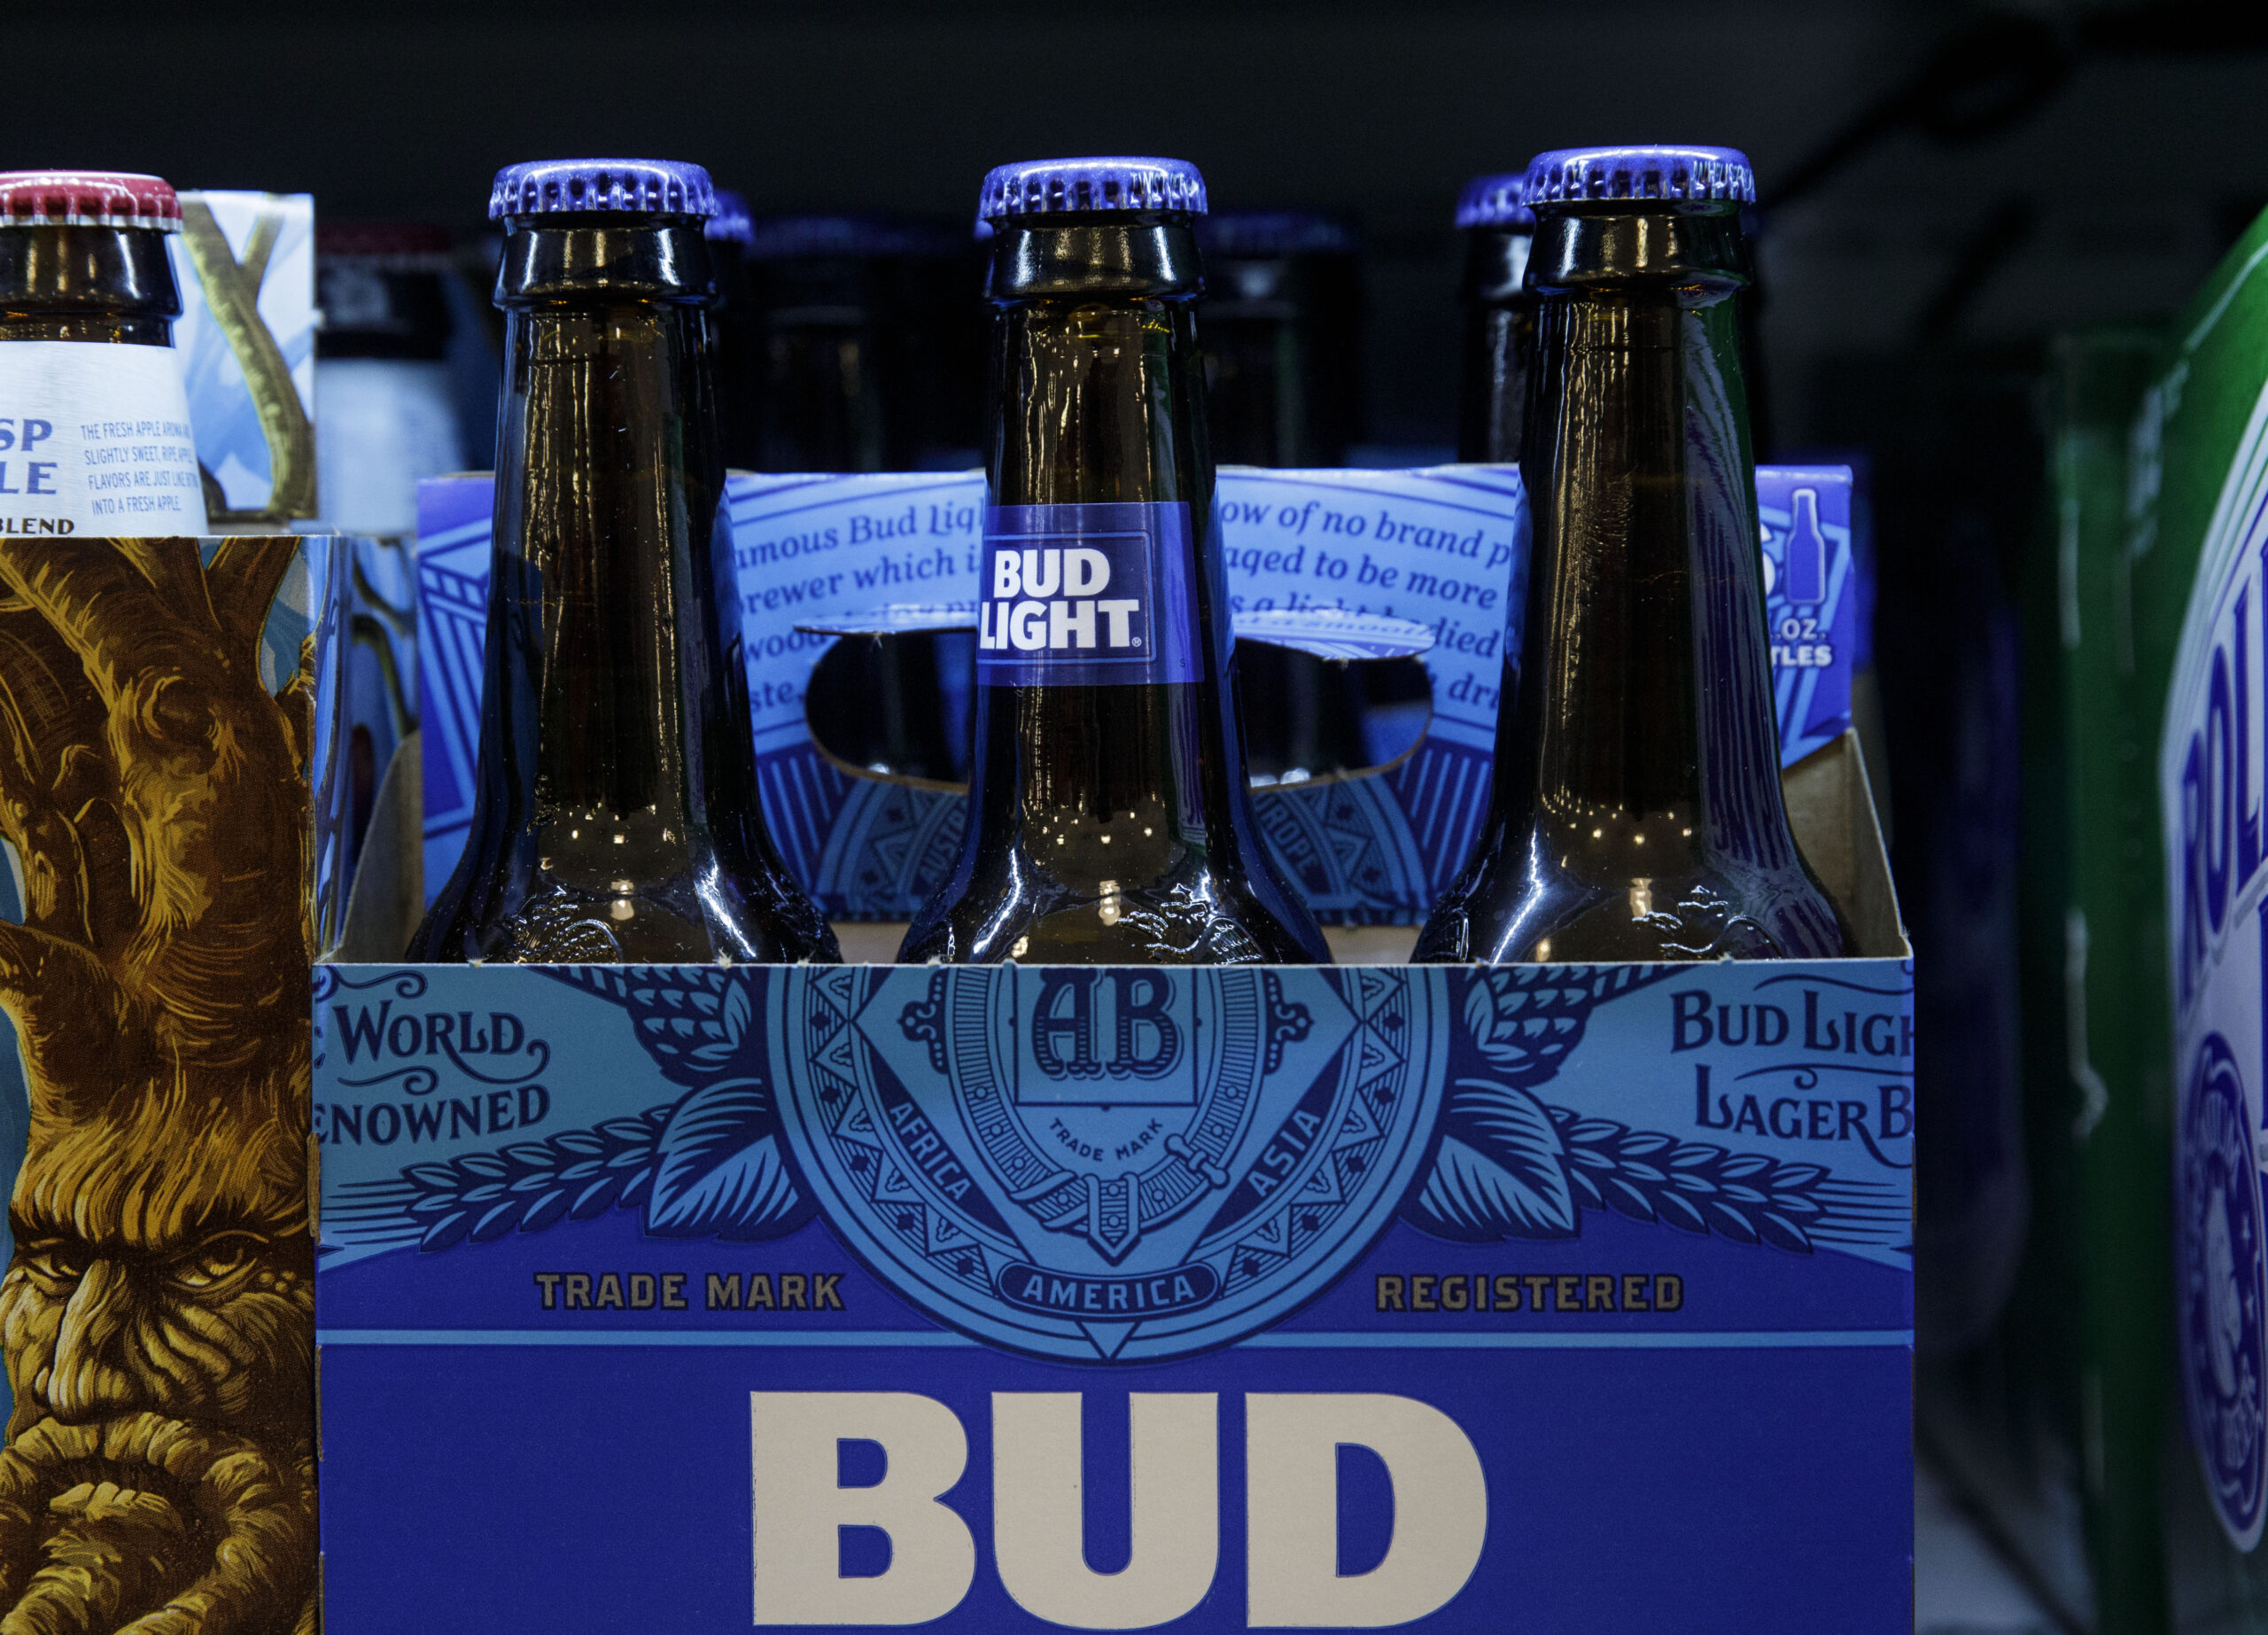 What The Bud Light Debacle Illuminates About Woke Ideology In Corporate America